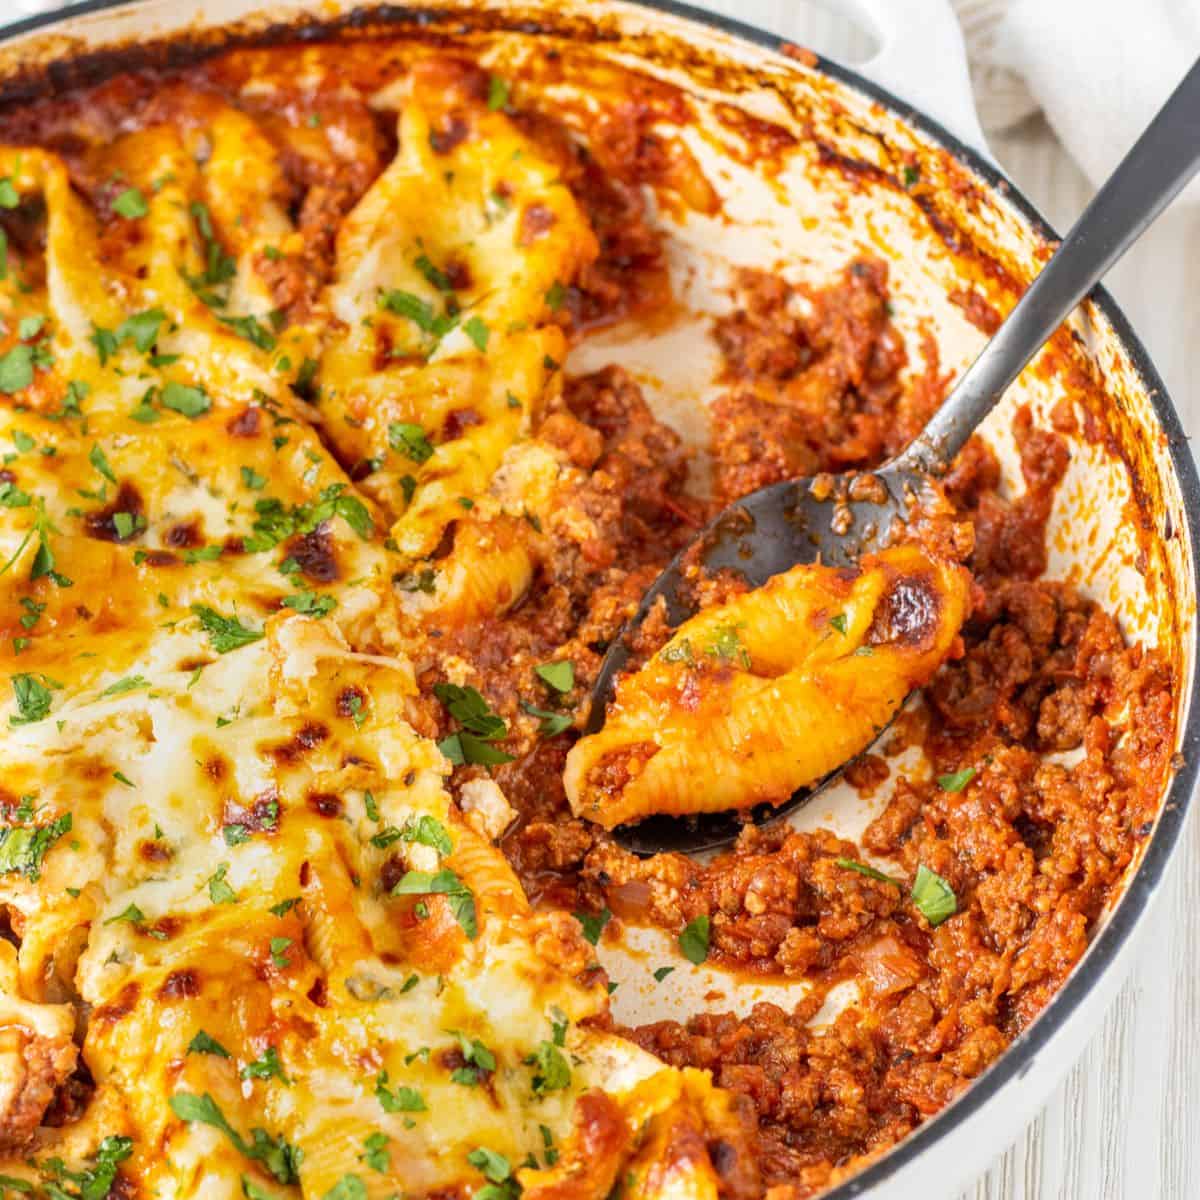 Stuffed Shells With Meat Sauce